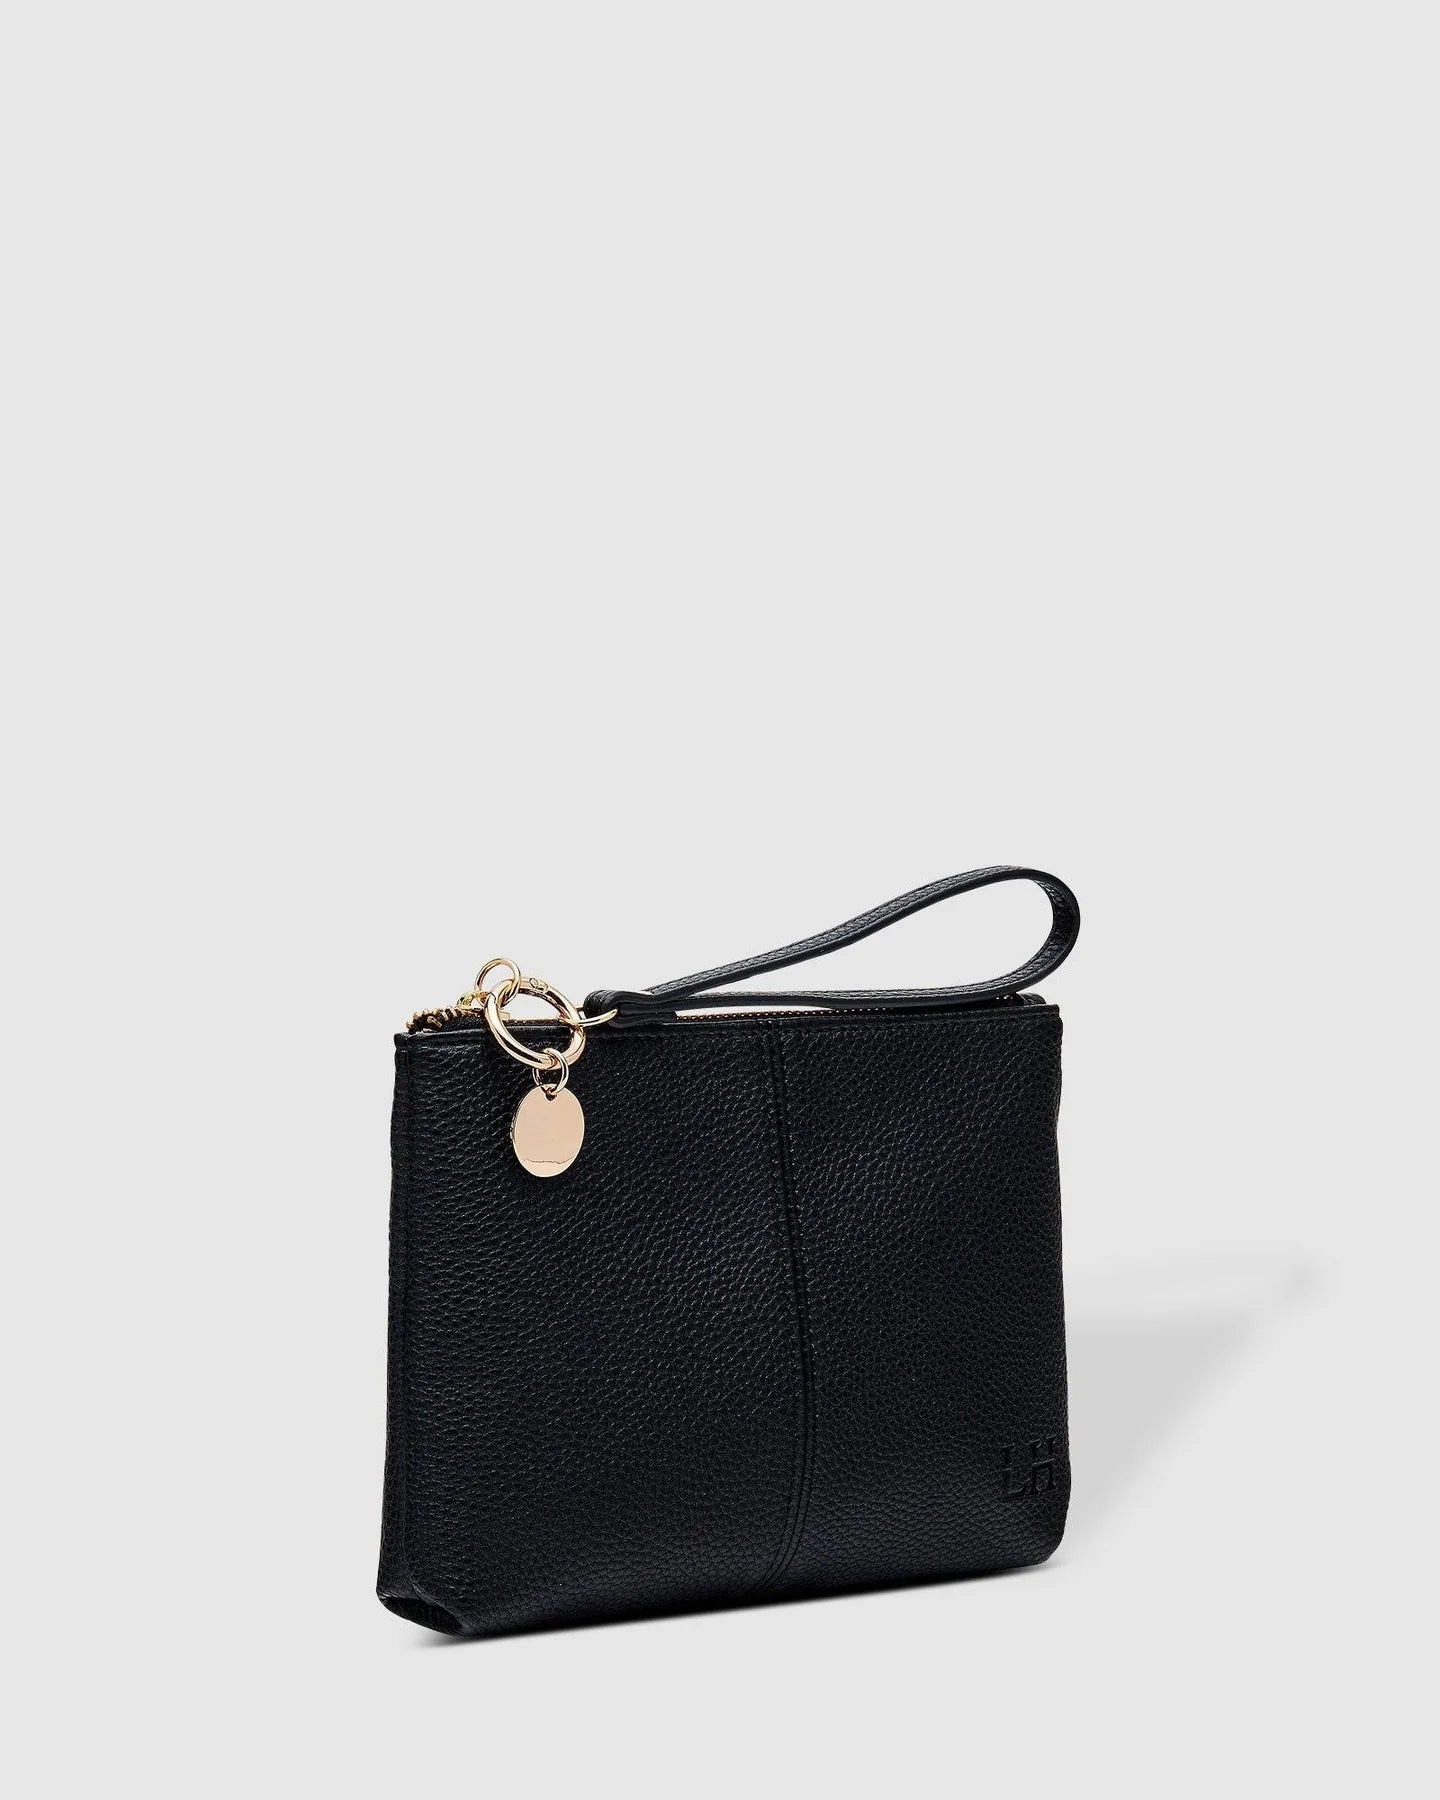 Baby Gracie Clutch (Black) - Something For Me​​